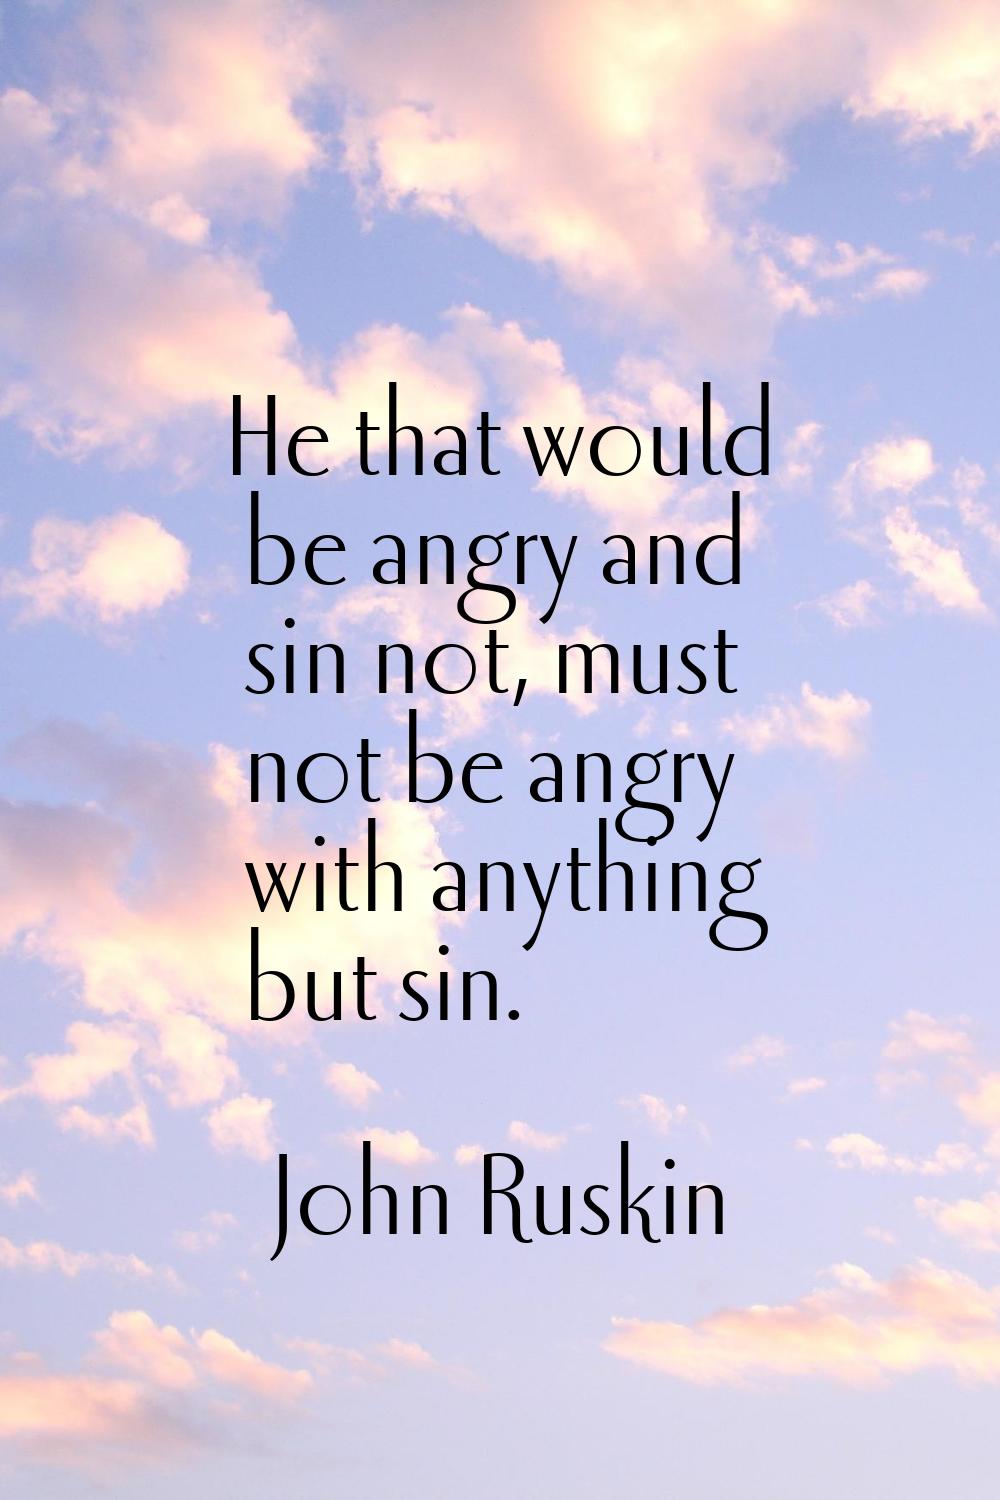 He that would be angry and sin not, must not be angry with anything but sin.